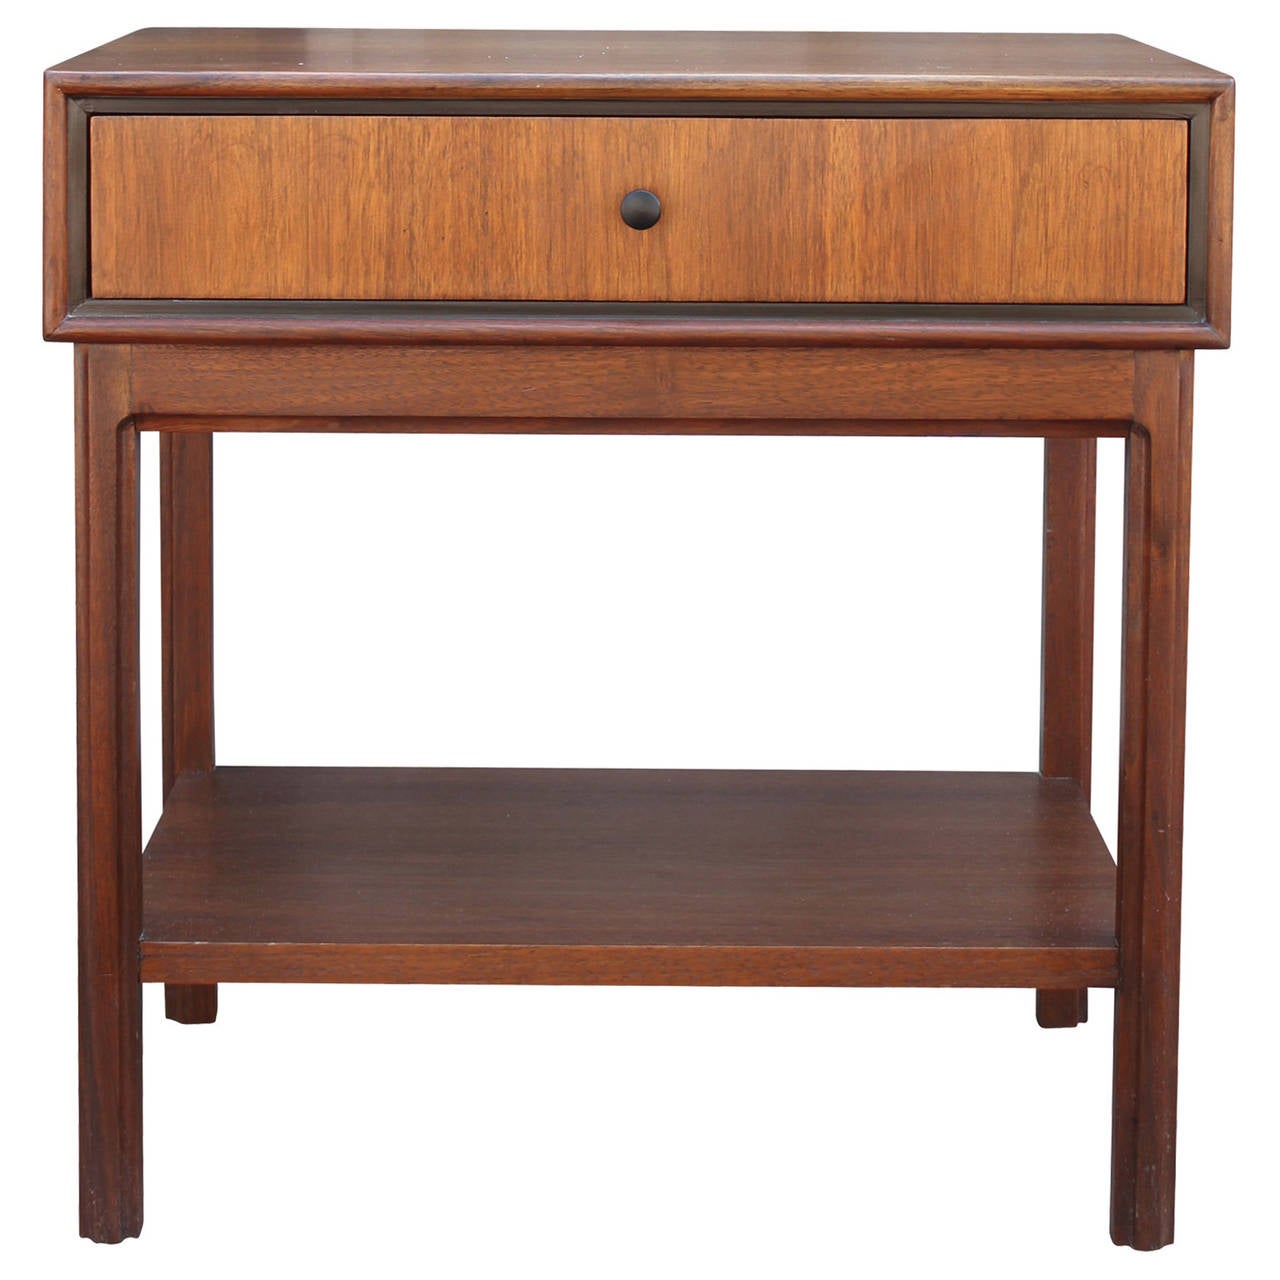 Beautiful pair of nightstands or bedside tables in the style of Paul McCobb. Tables have a small drawer with a dainty round pull. Tables have clean lines with a wonderful attention to detail.